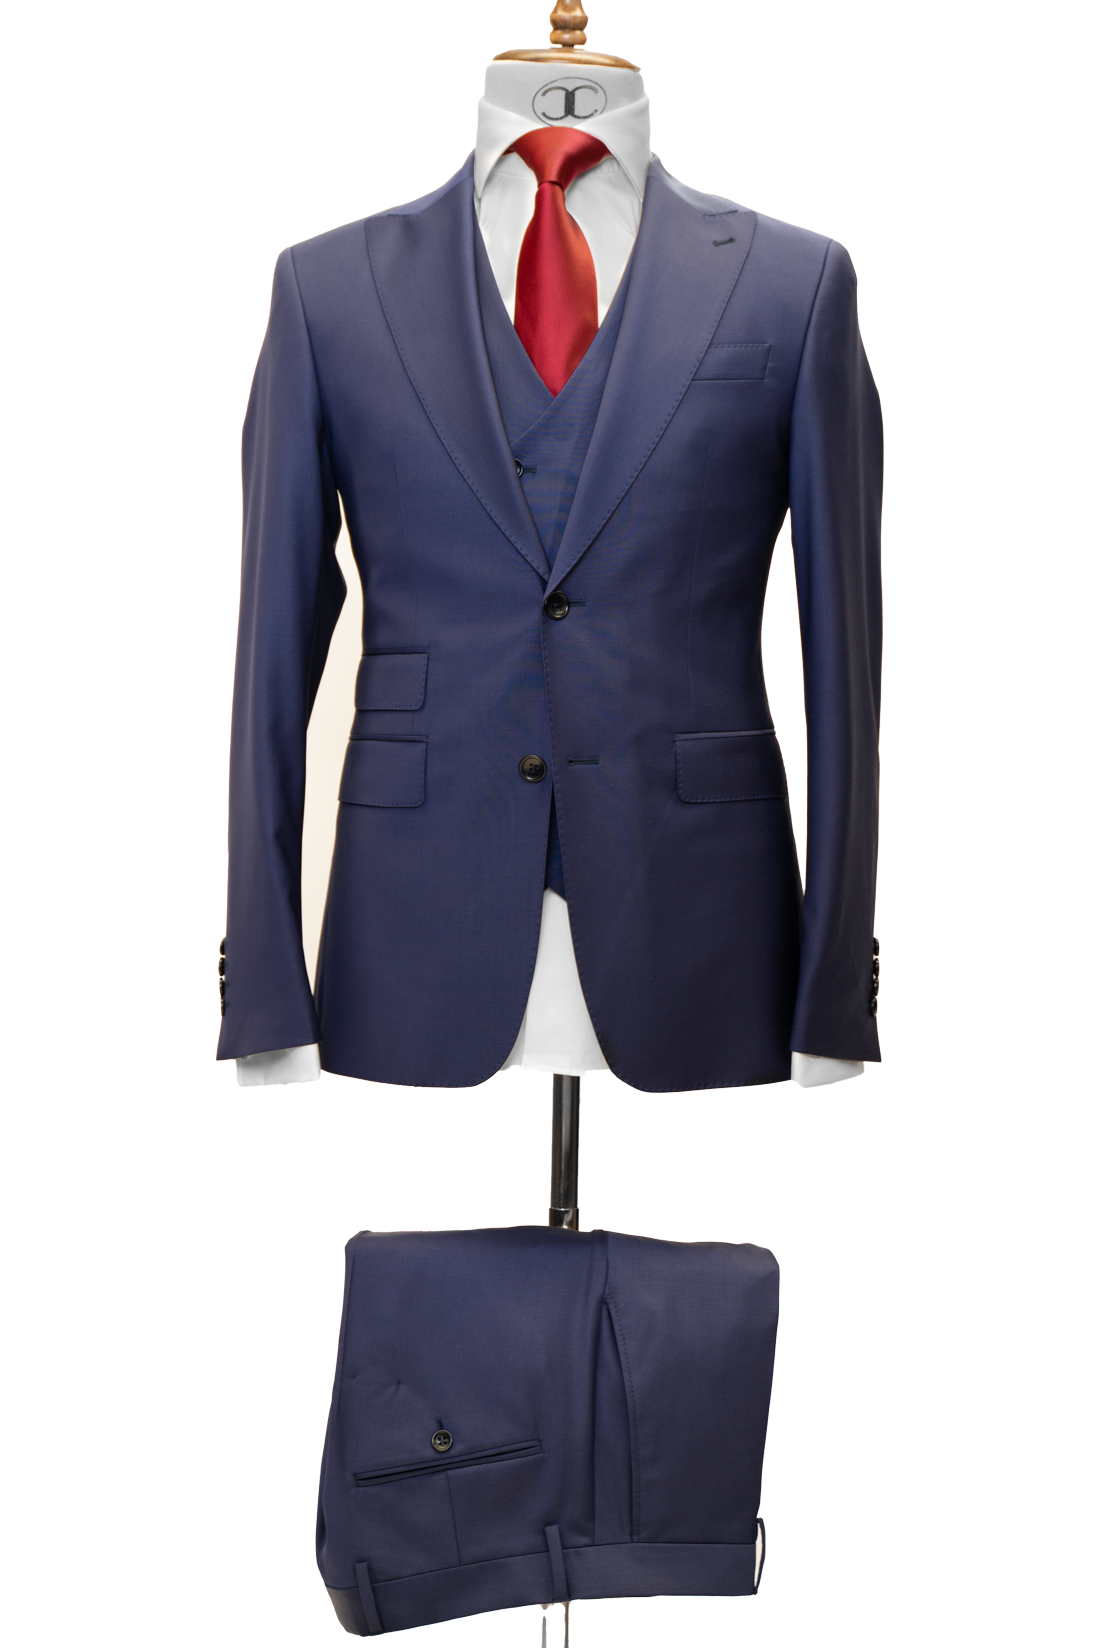 Slim Fit French Blue Two Piece Suit GB-188 – Italy Direct